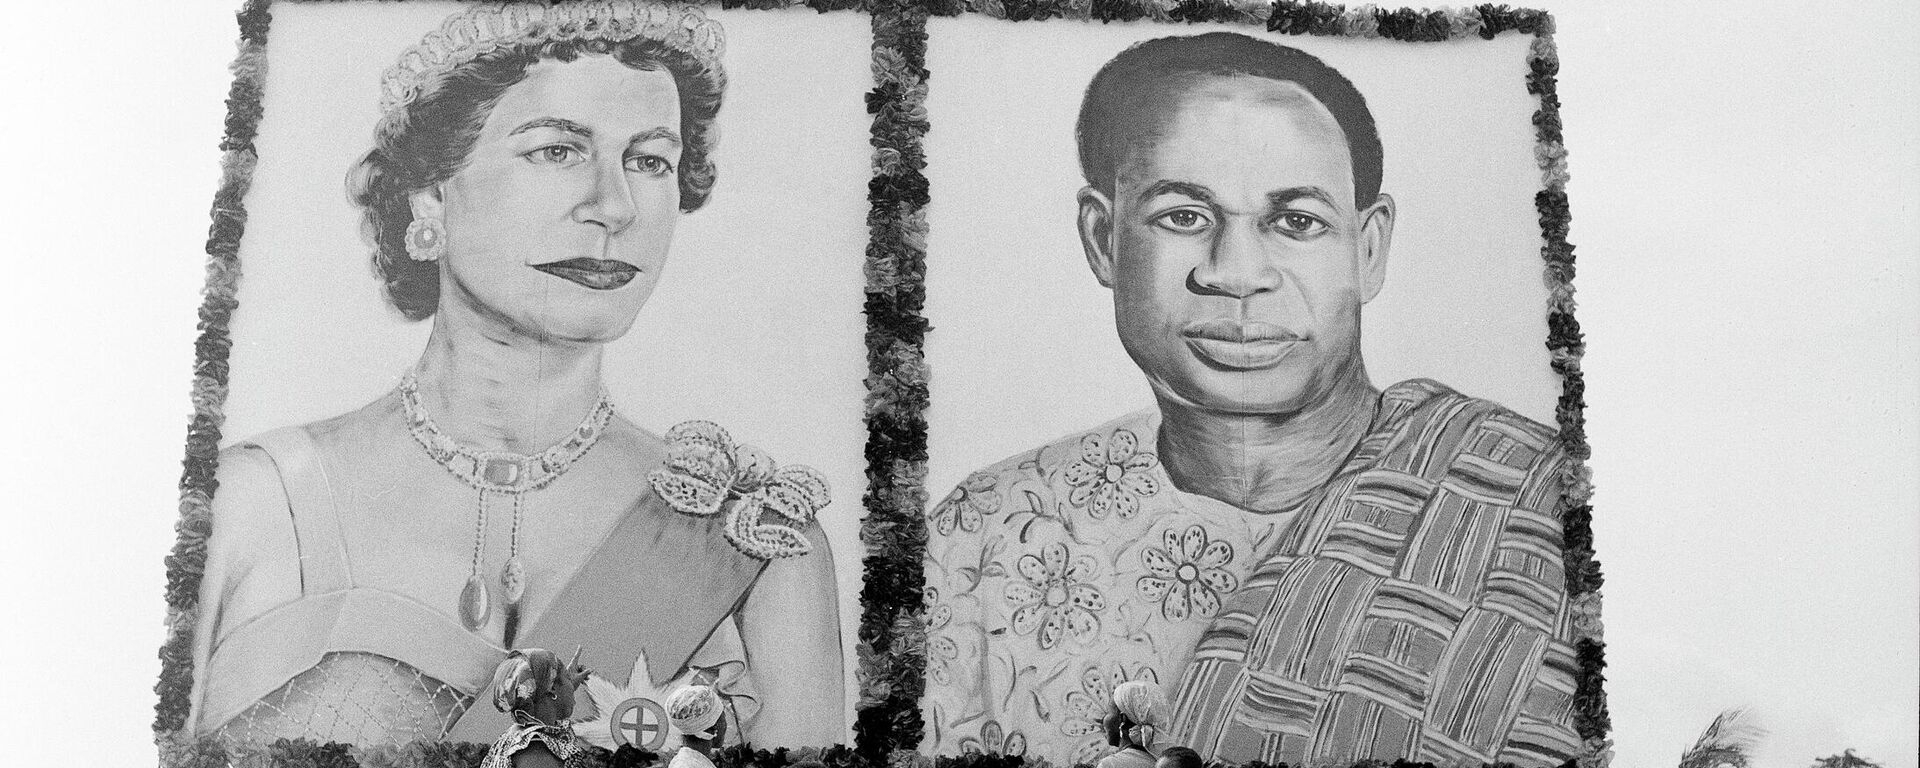 Huge portraits of Britain's Queen Elizabeth II and Ghana's President Kwame Nkrumah are displayed in Accra, Nov. 9, 1961, as the city prepared for the arrival of the British monarch on a state visit to Ghana. - Sputnik International, 1920, 10.09.2022